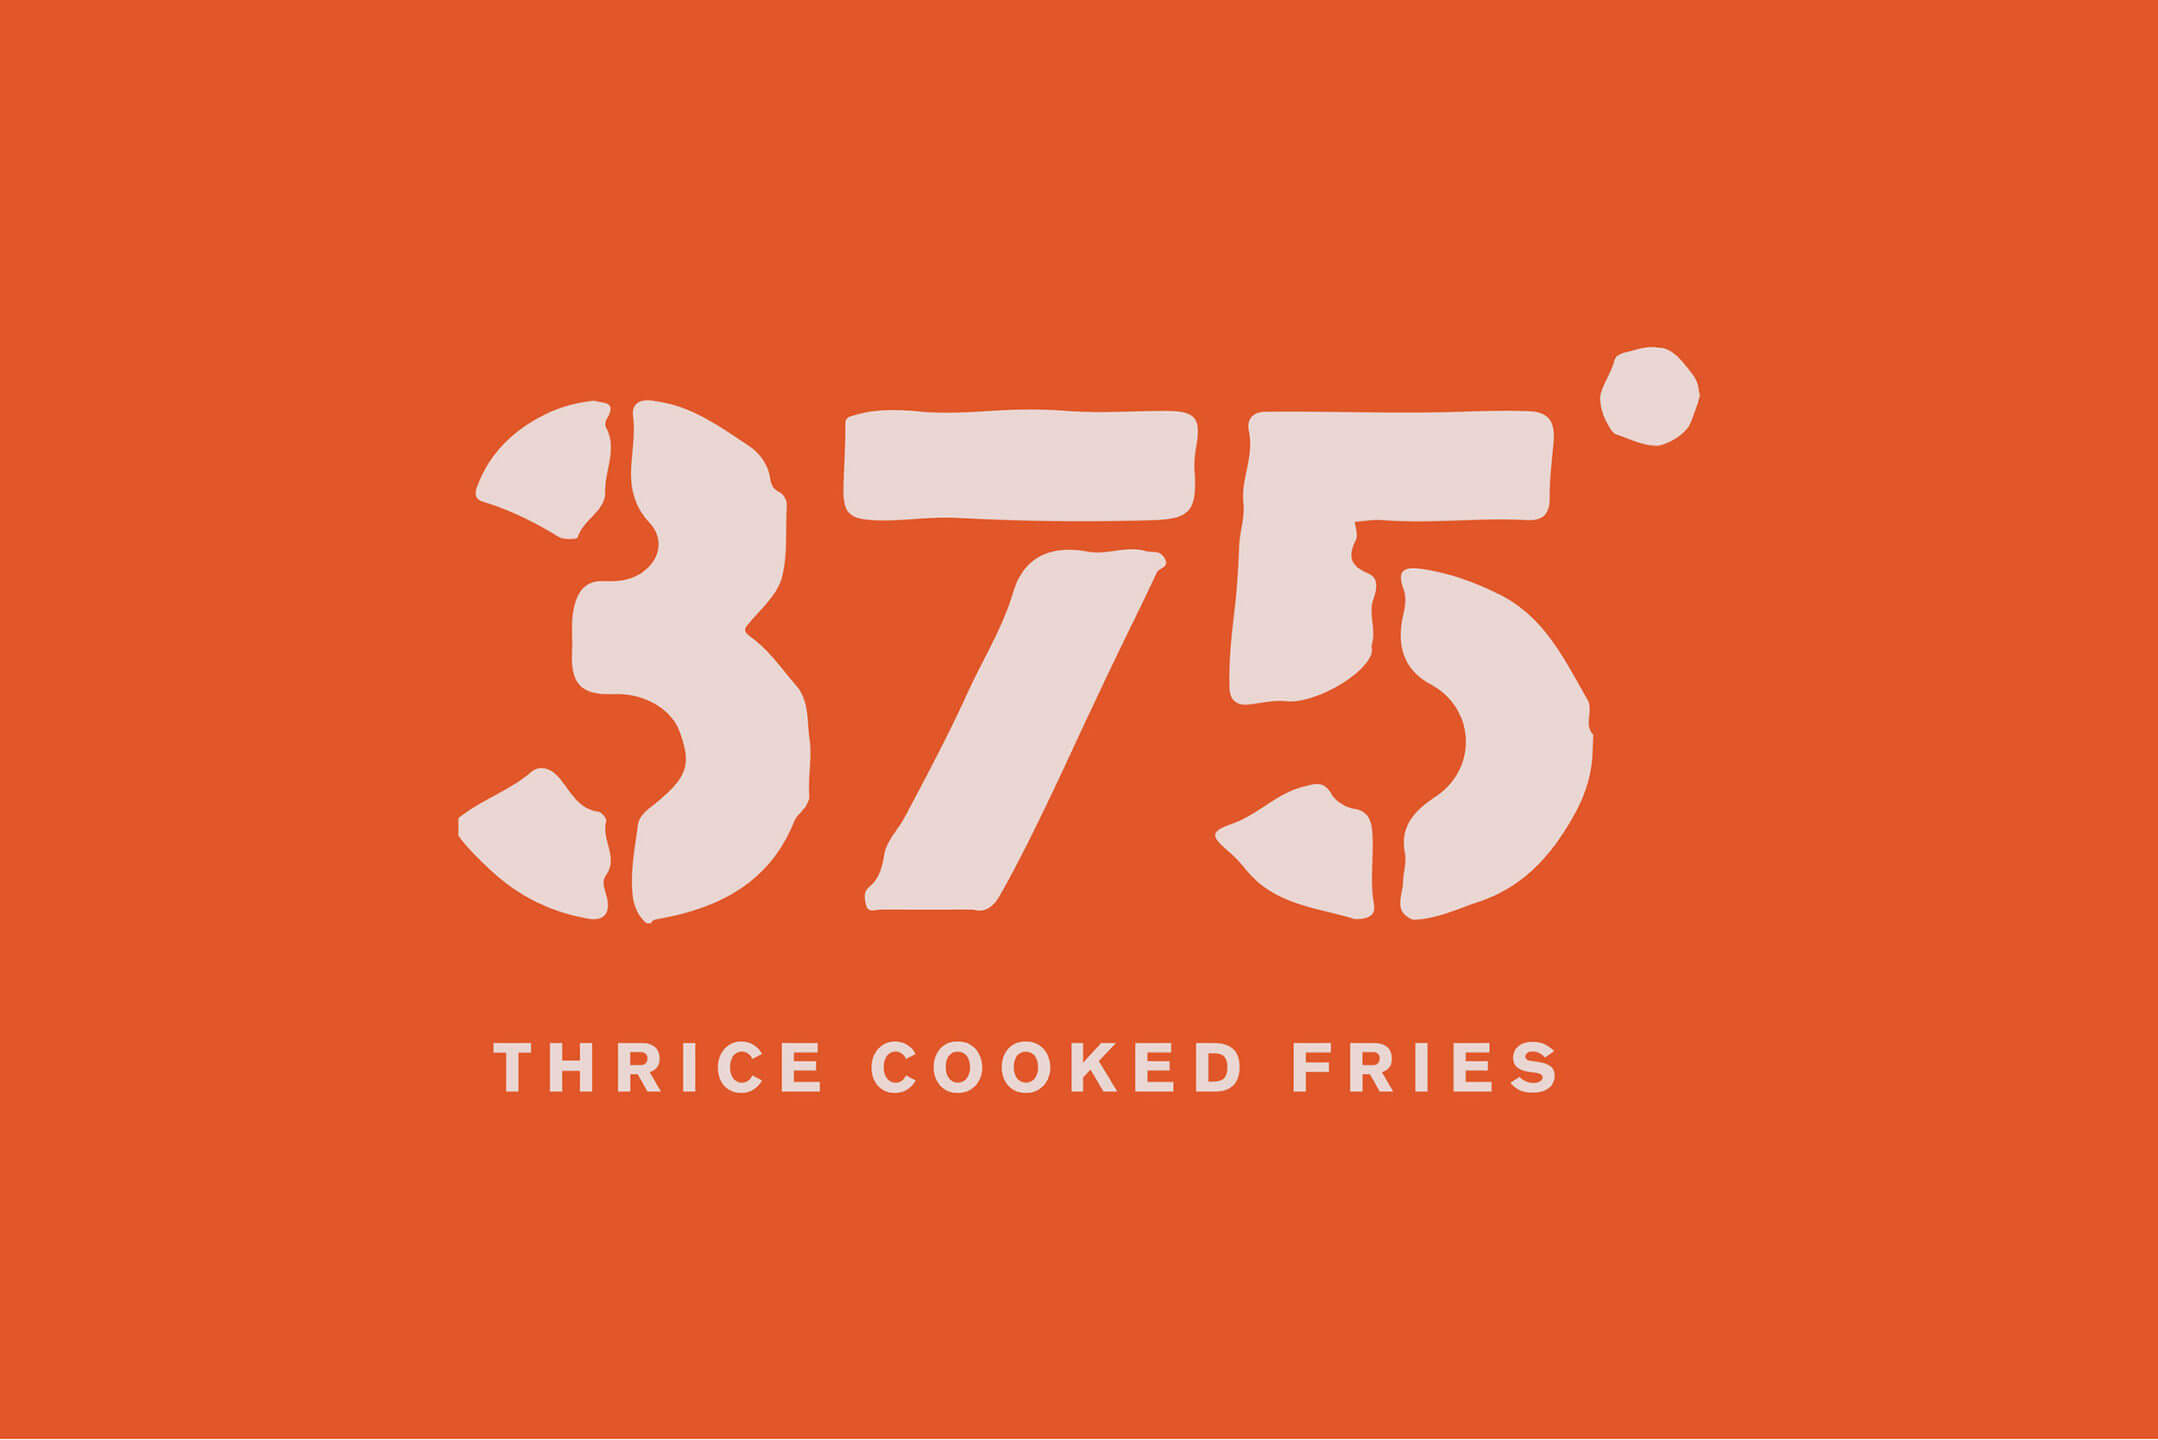 Bold and grungy logo type design for food and beverage brand 375 Chicken and Fries